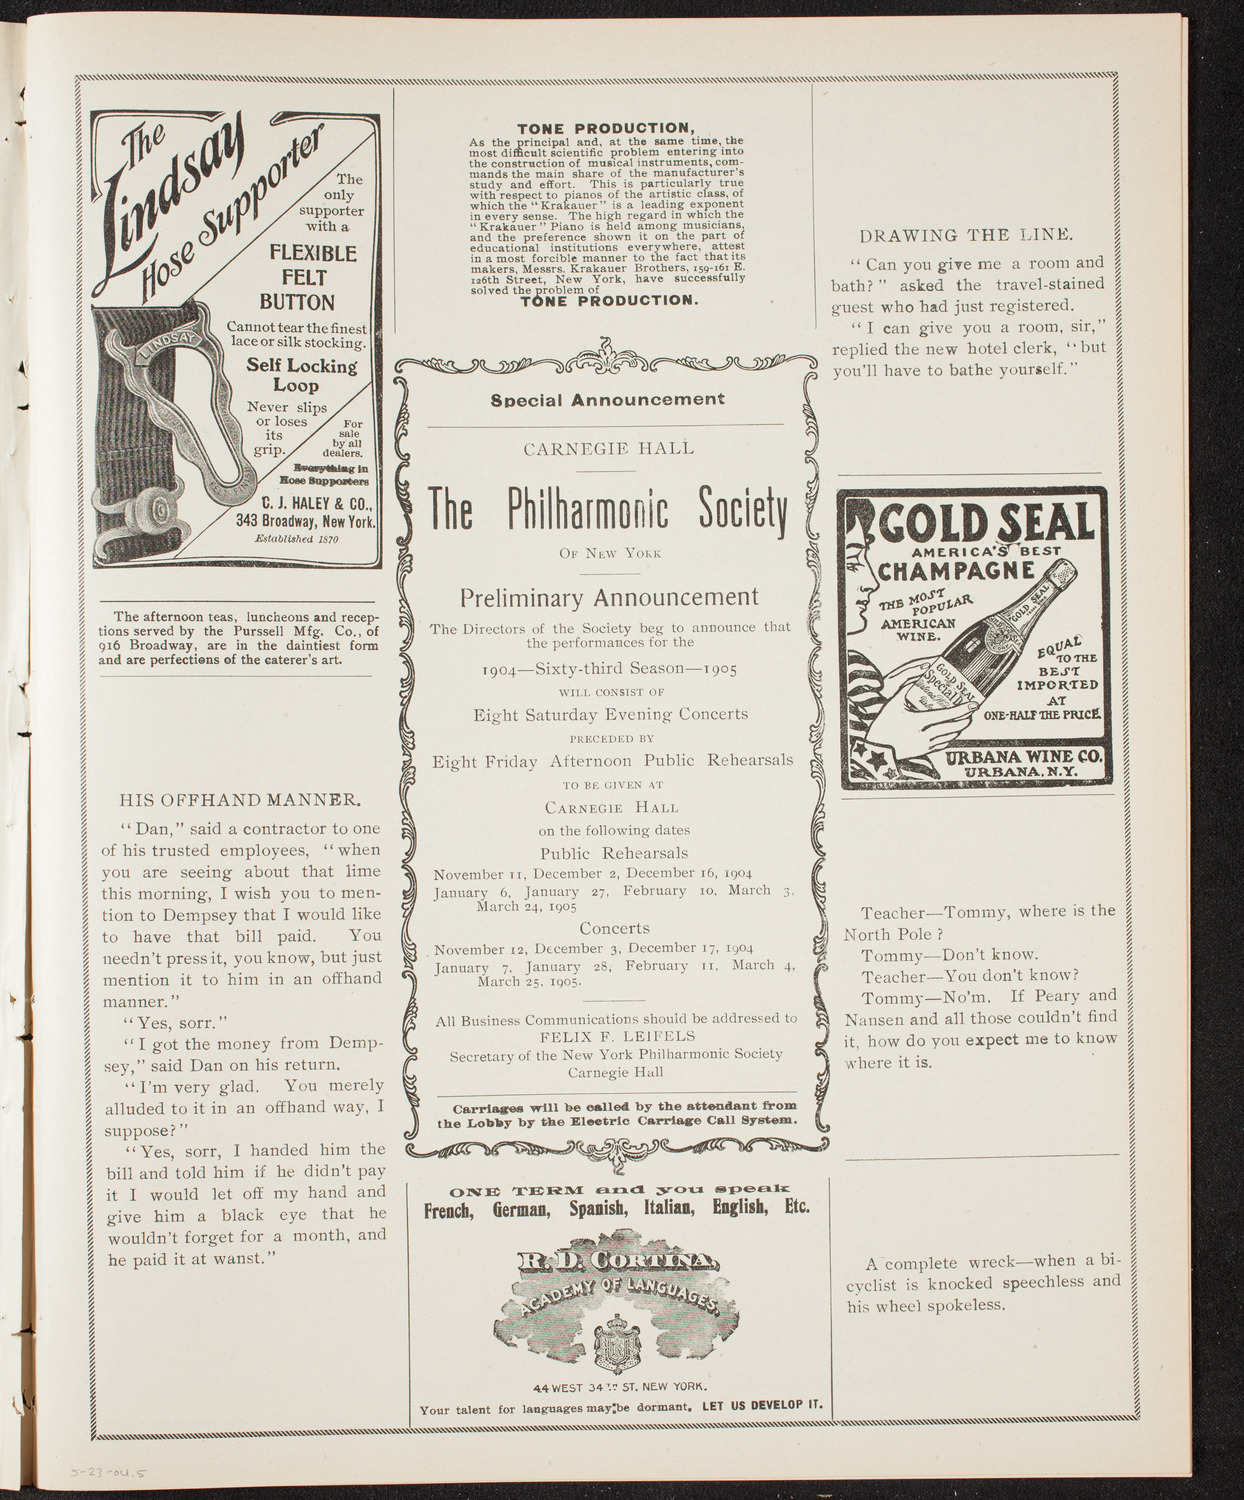 Graduation: Packard Commercial School, May 23, 1904, program page 9